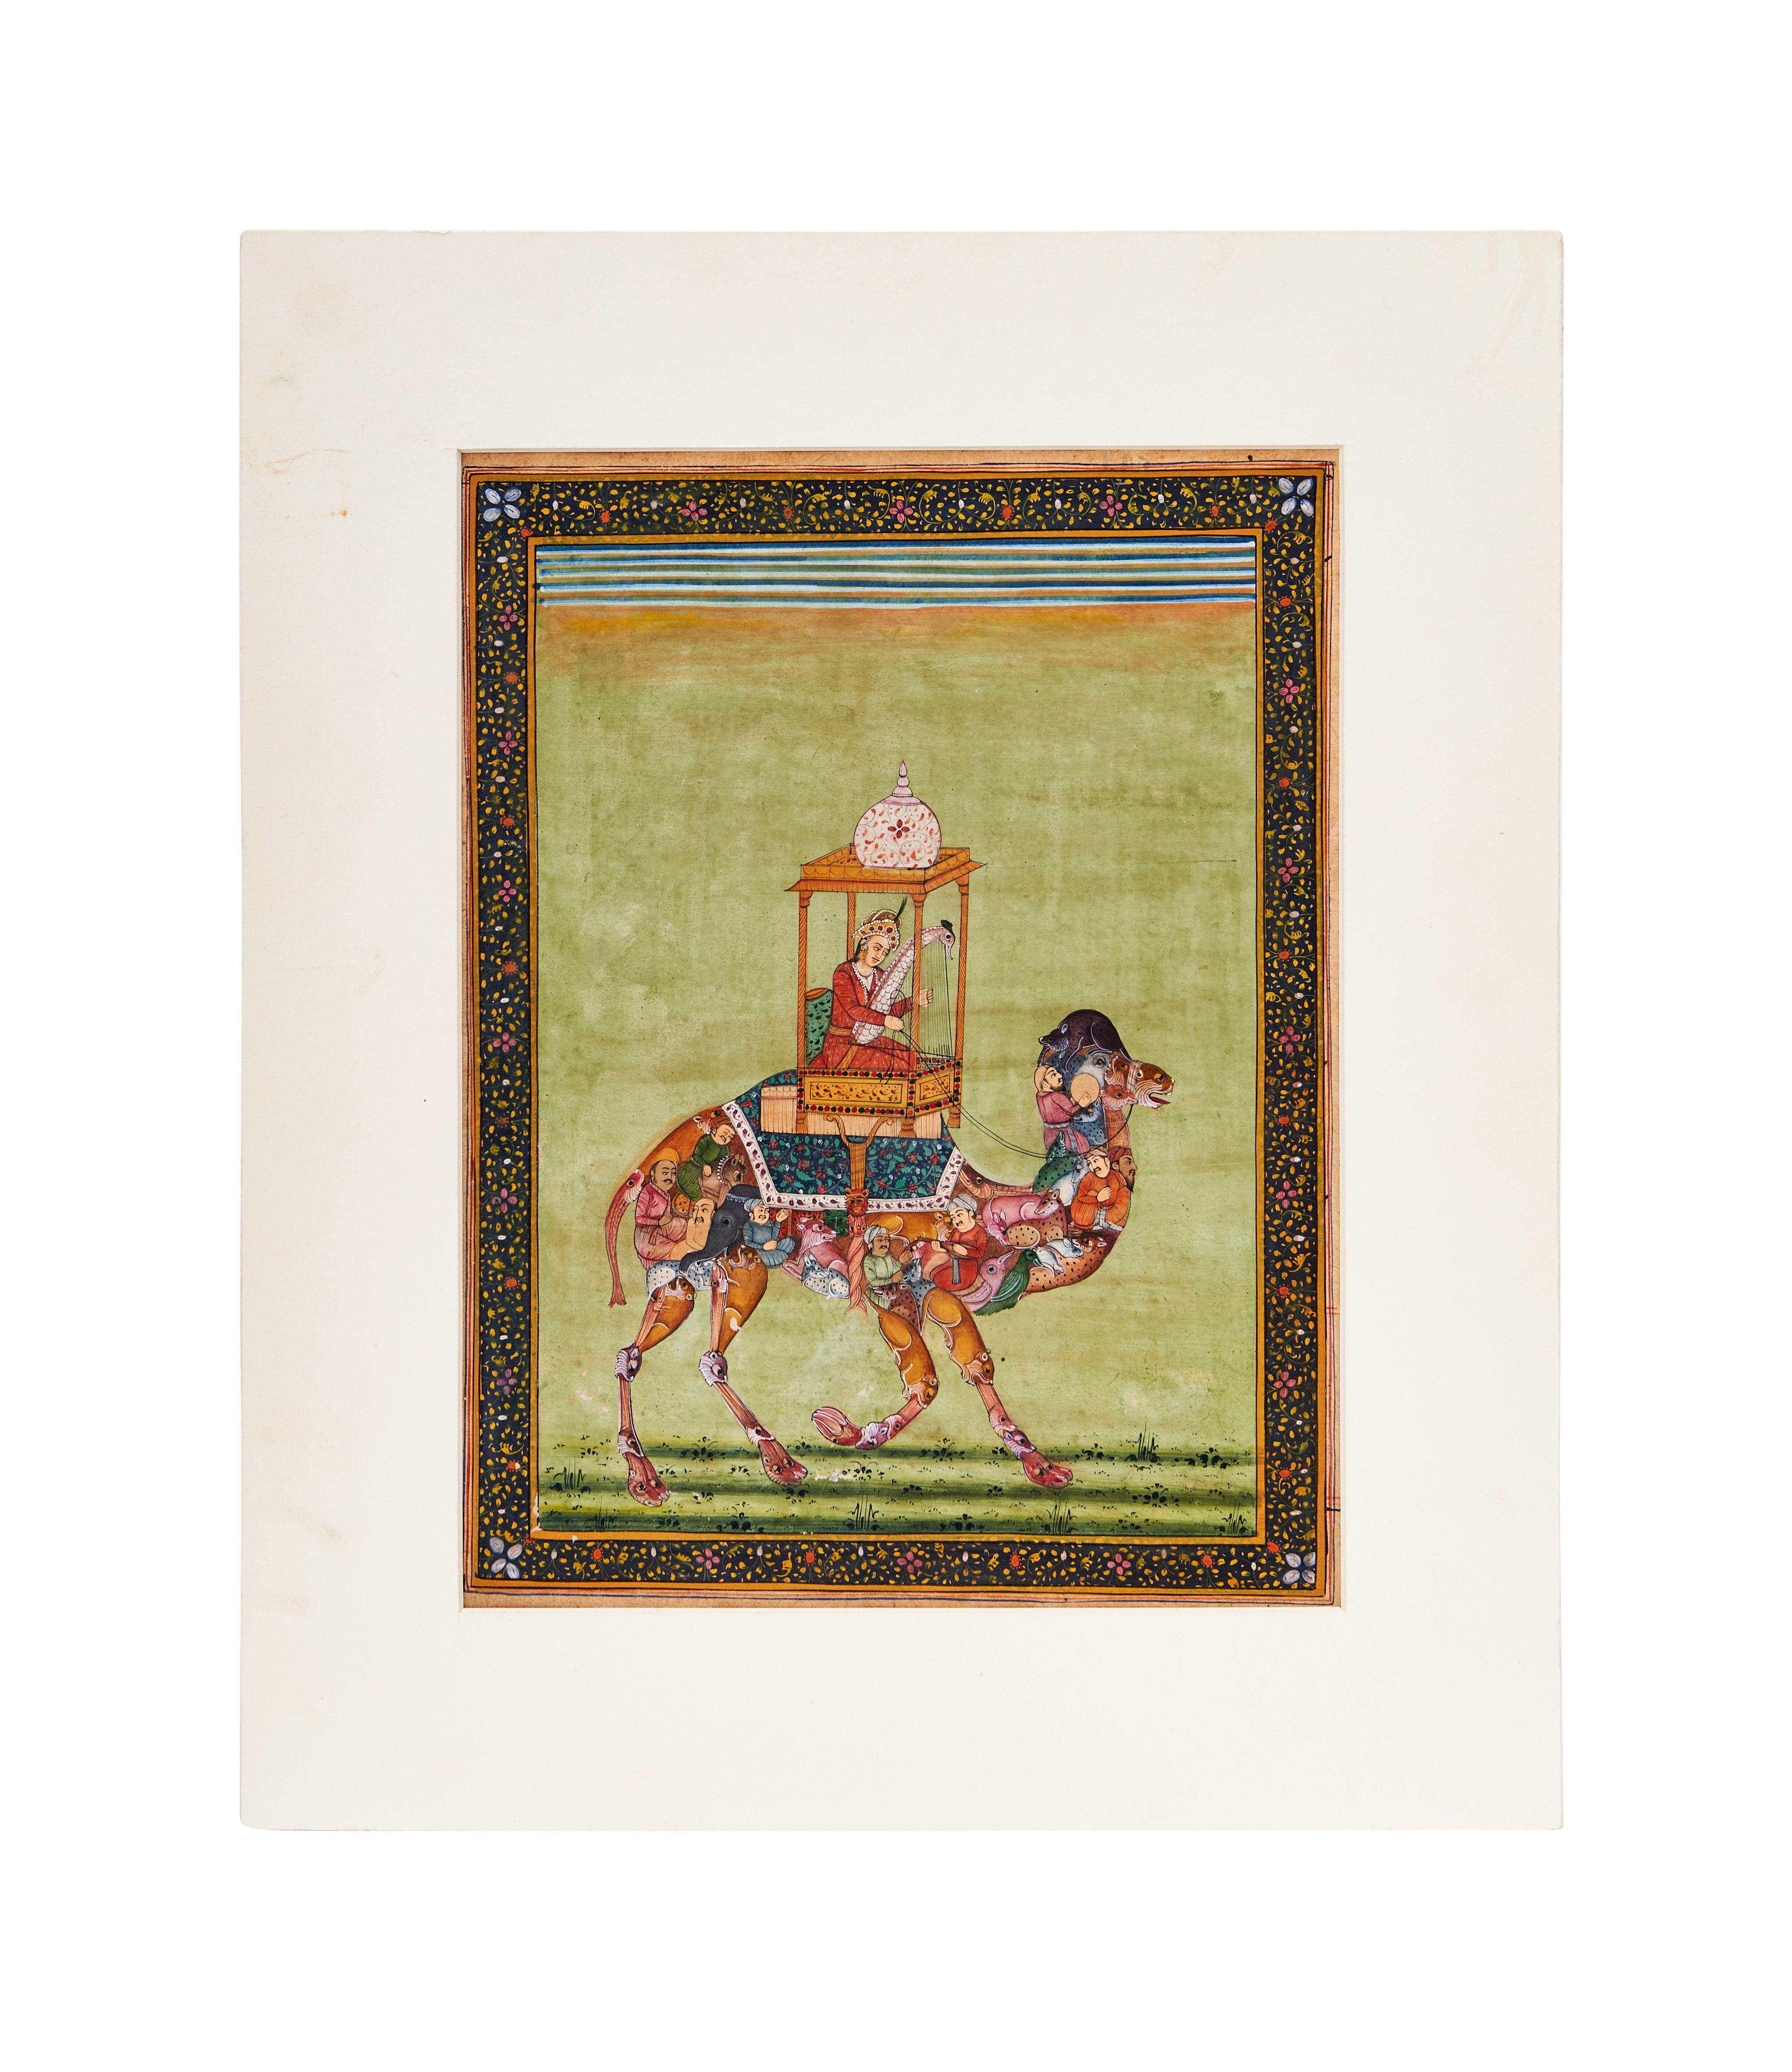 A LADY RIDING A COMPOSITE CAMEL, NORTHE INDIA, 19TH CENTURY